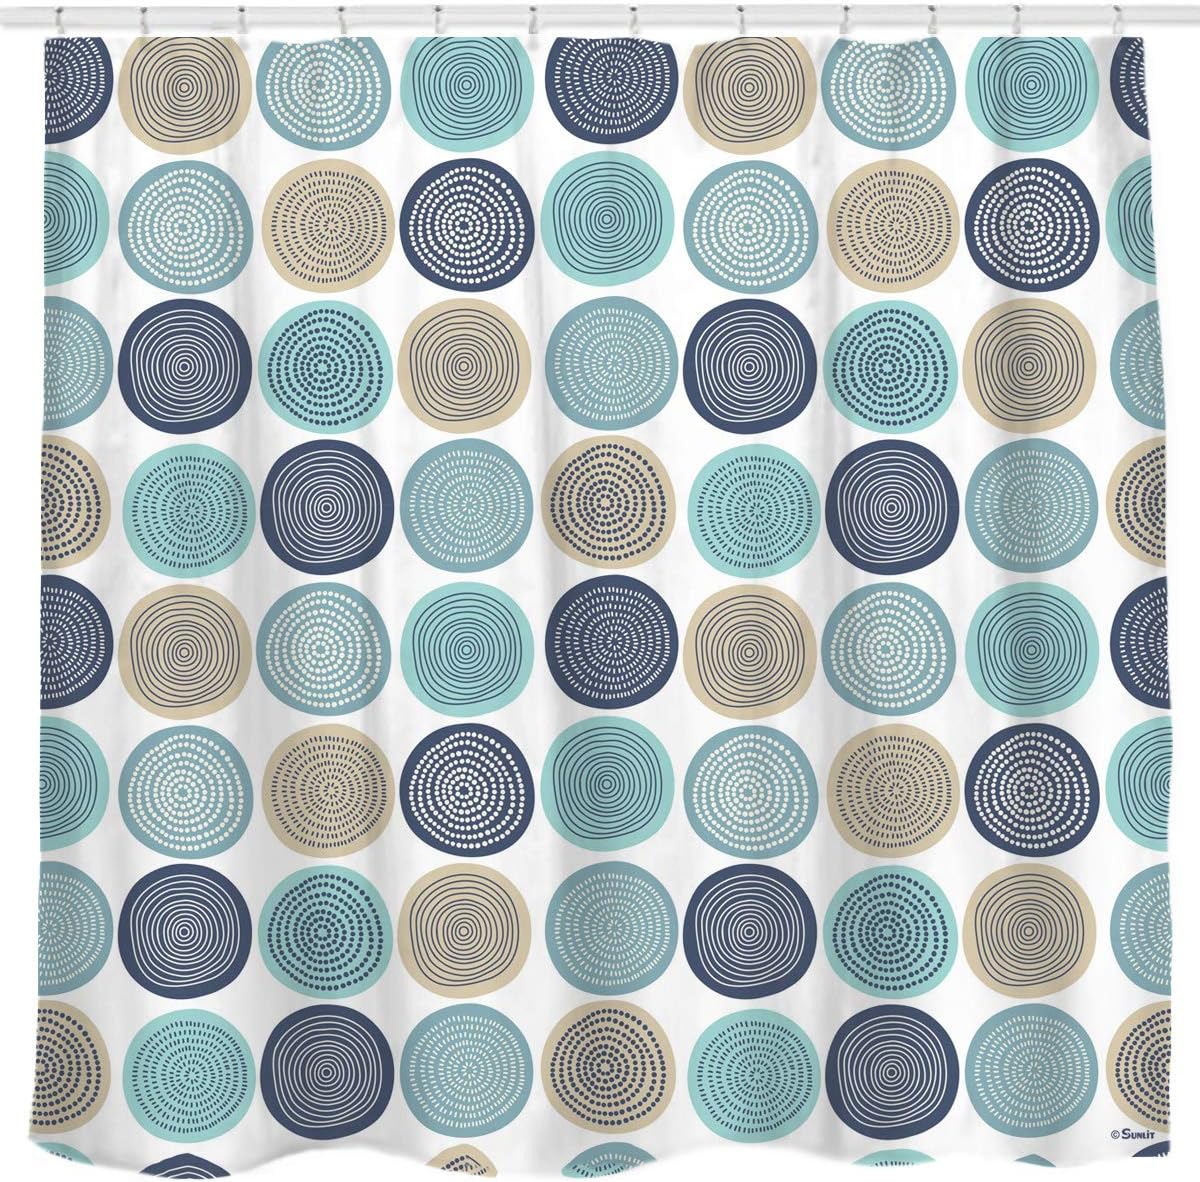 Sunlit Abstract Tree Rings Woody Artistic Fabric Shower Curtain. Nature Pale Blue Teal Beige Light Brown